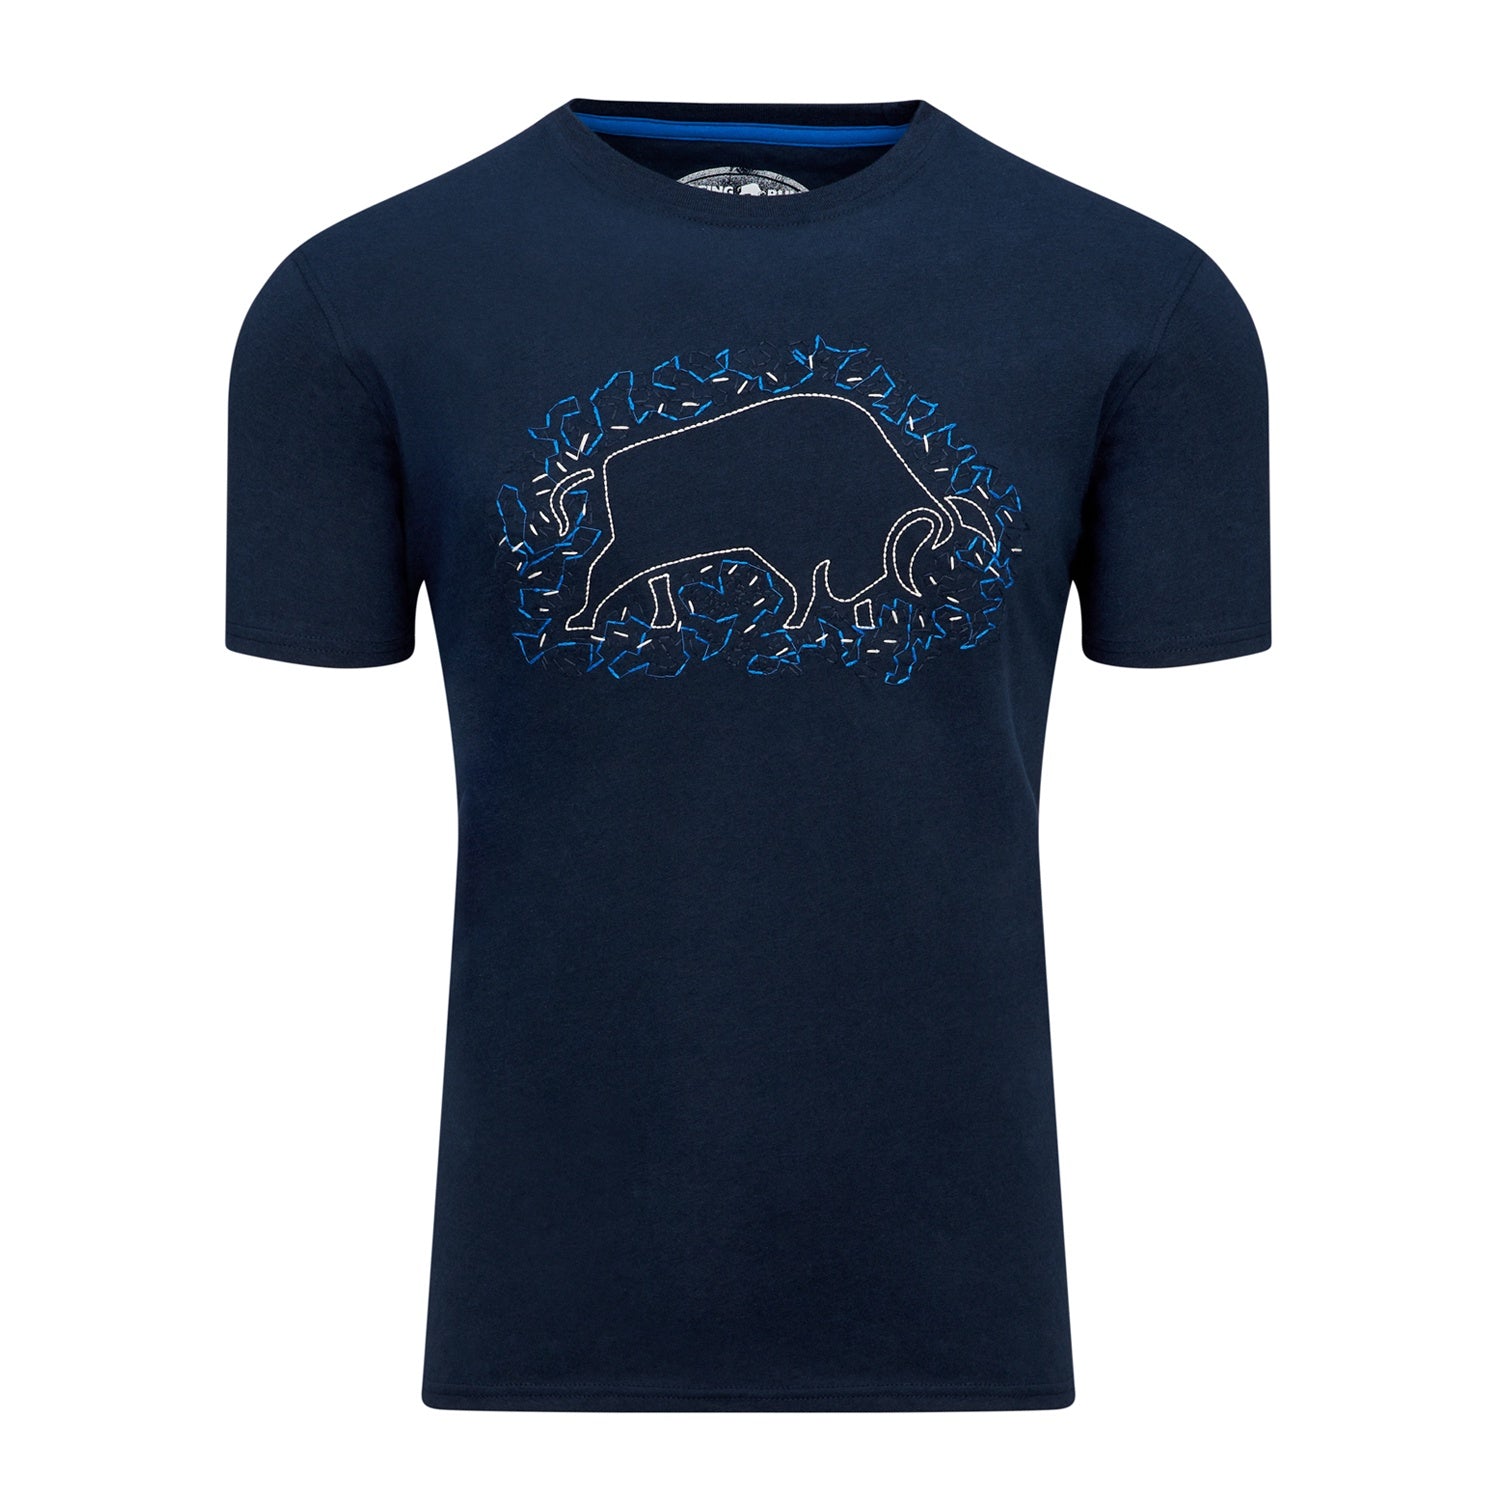 Raging Bull Scatter Stitch Tee - S22TS32 - Navy 1